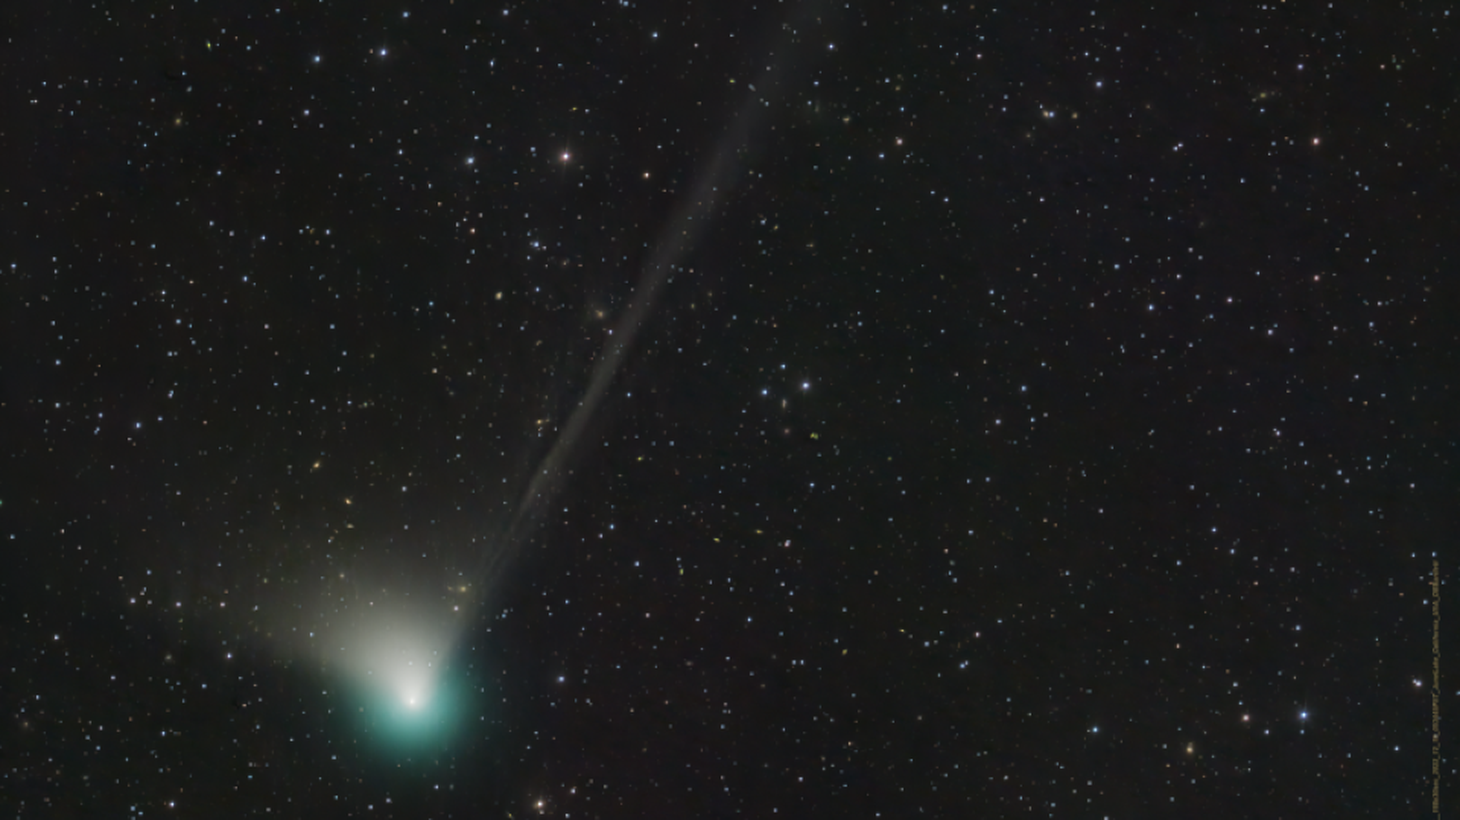 The comet C/2022 E3 has a green tail.